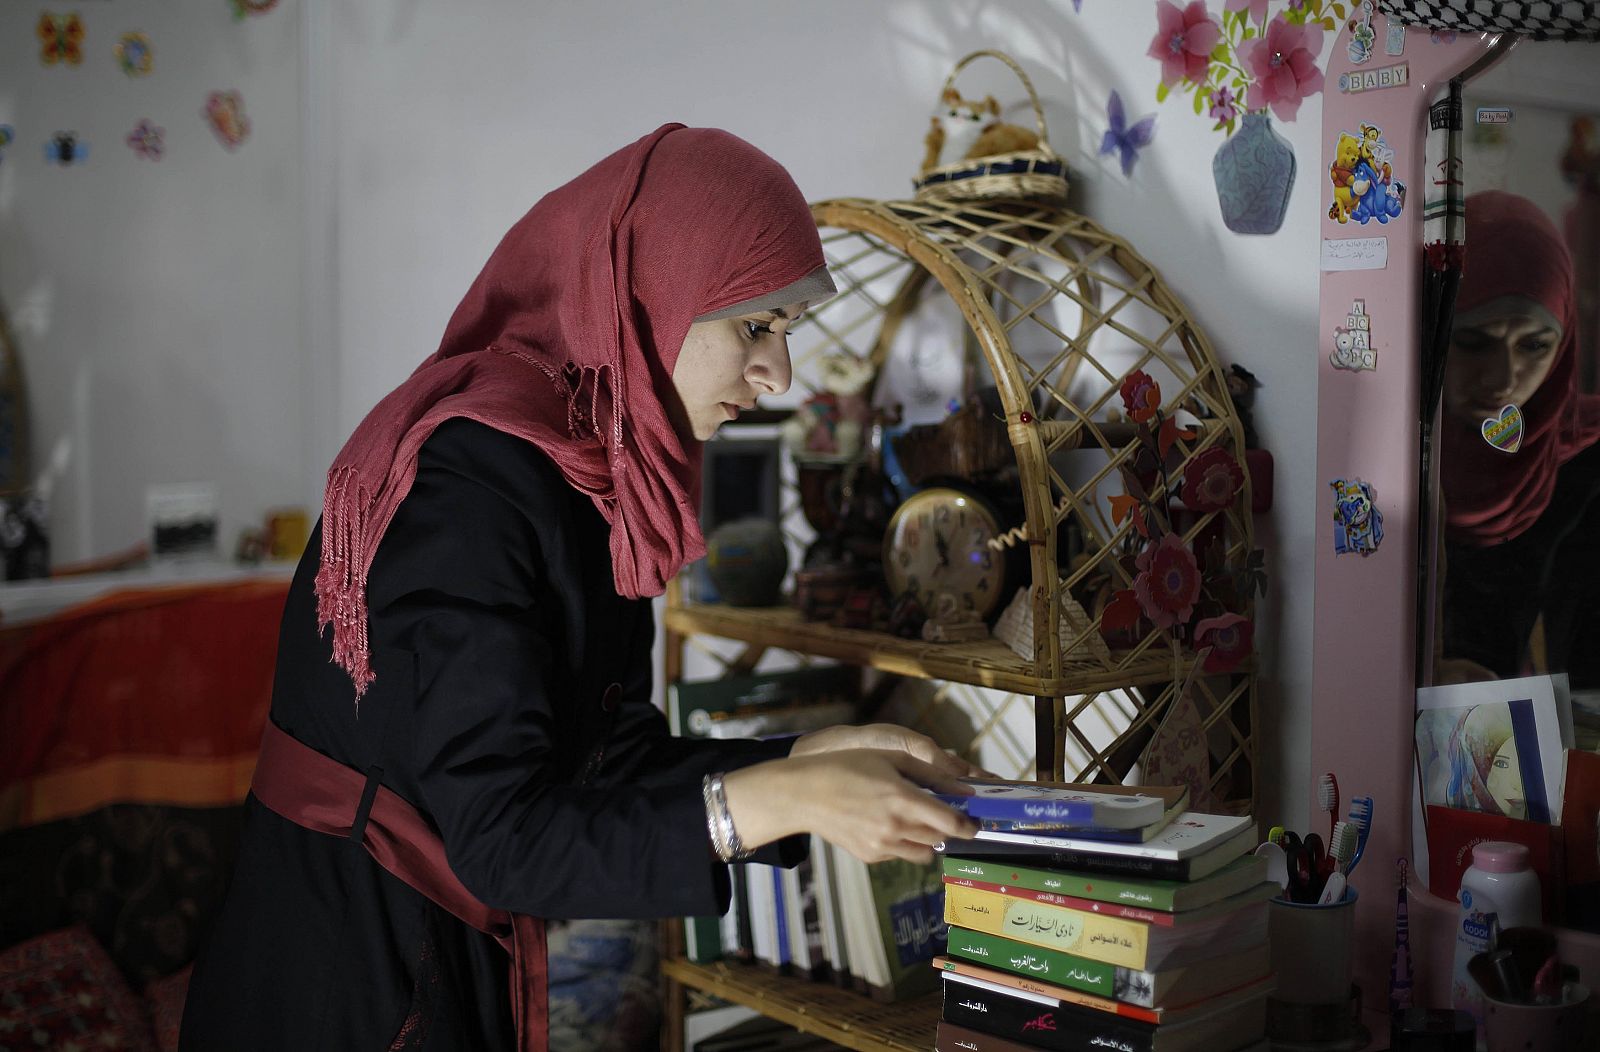 Isra Al-Modallal, a spokeswoman of the Hamas government in Gaza, prepares herself before heading to the office, at her house in Rafah refugee camp